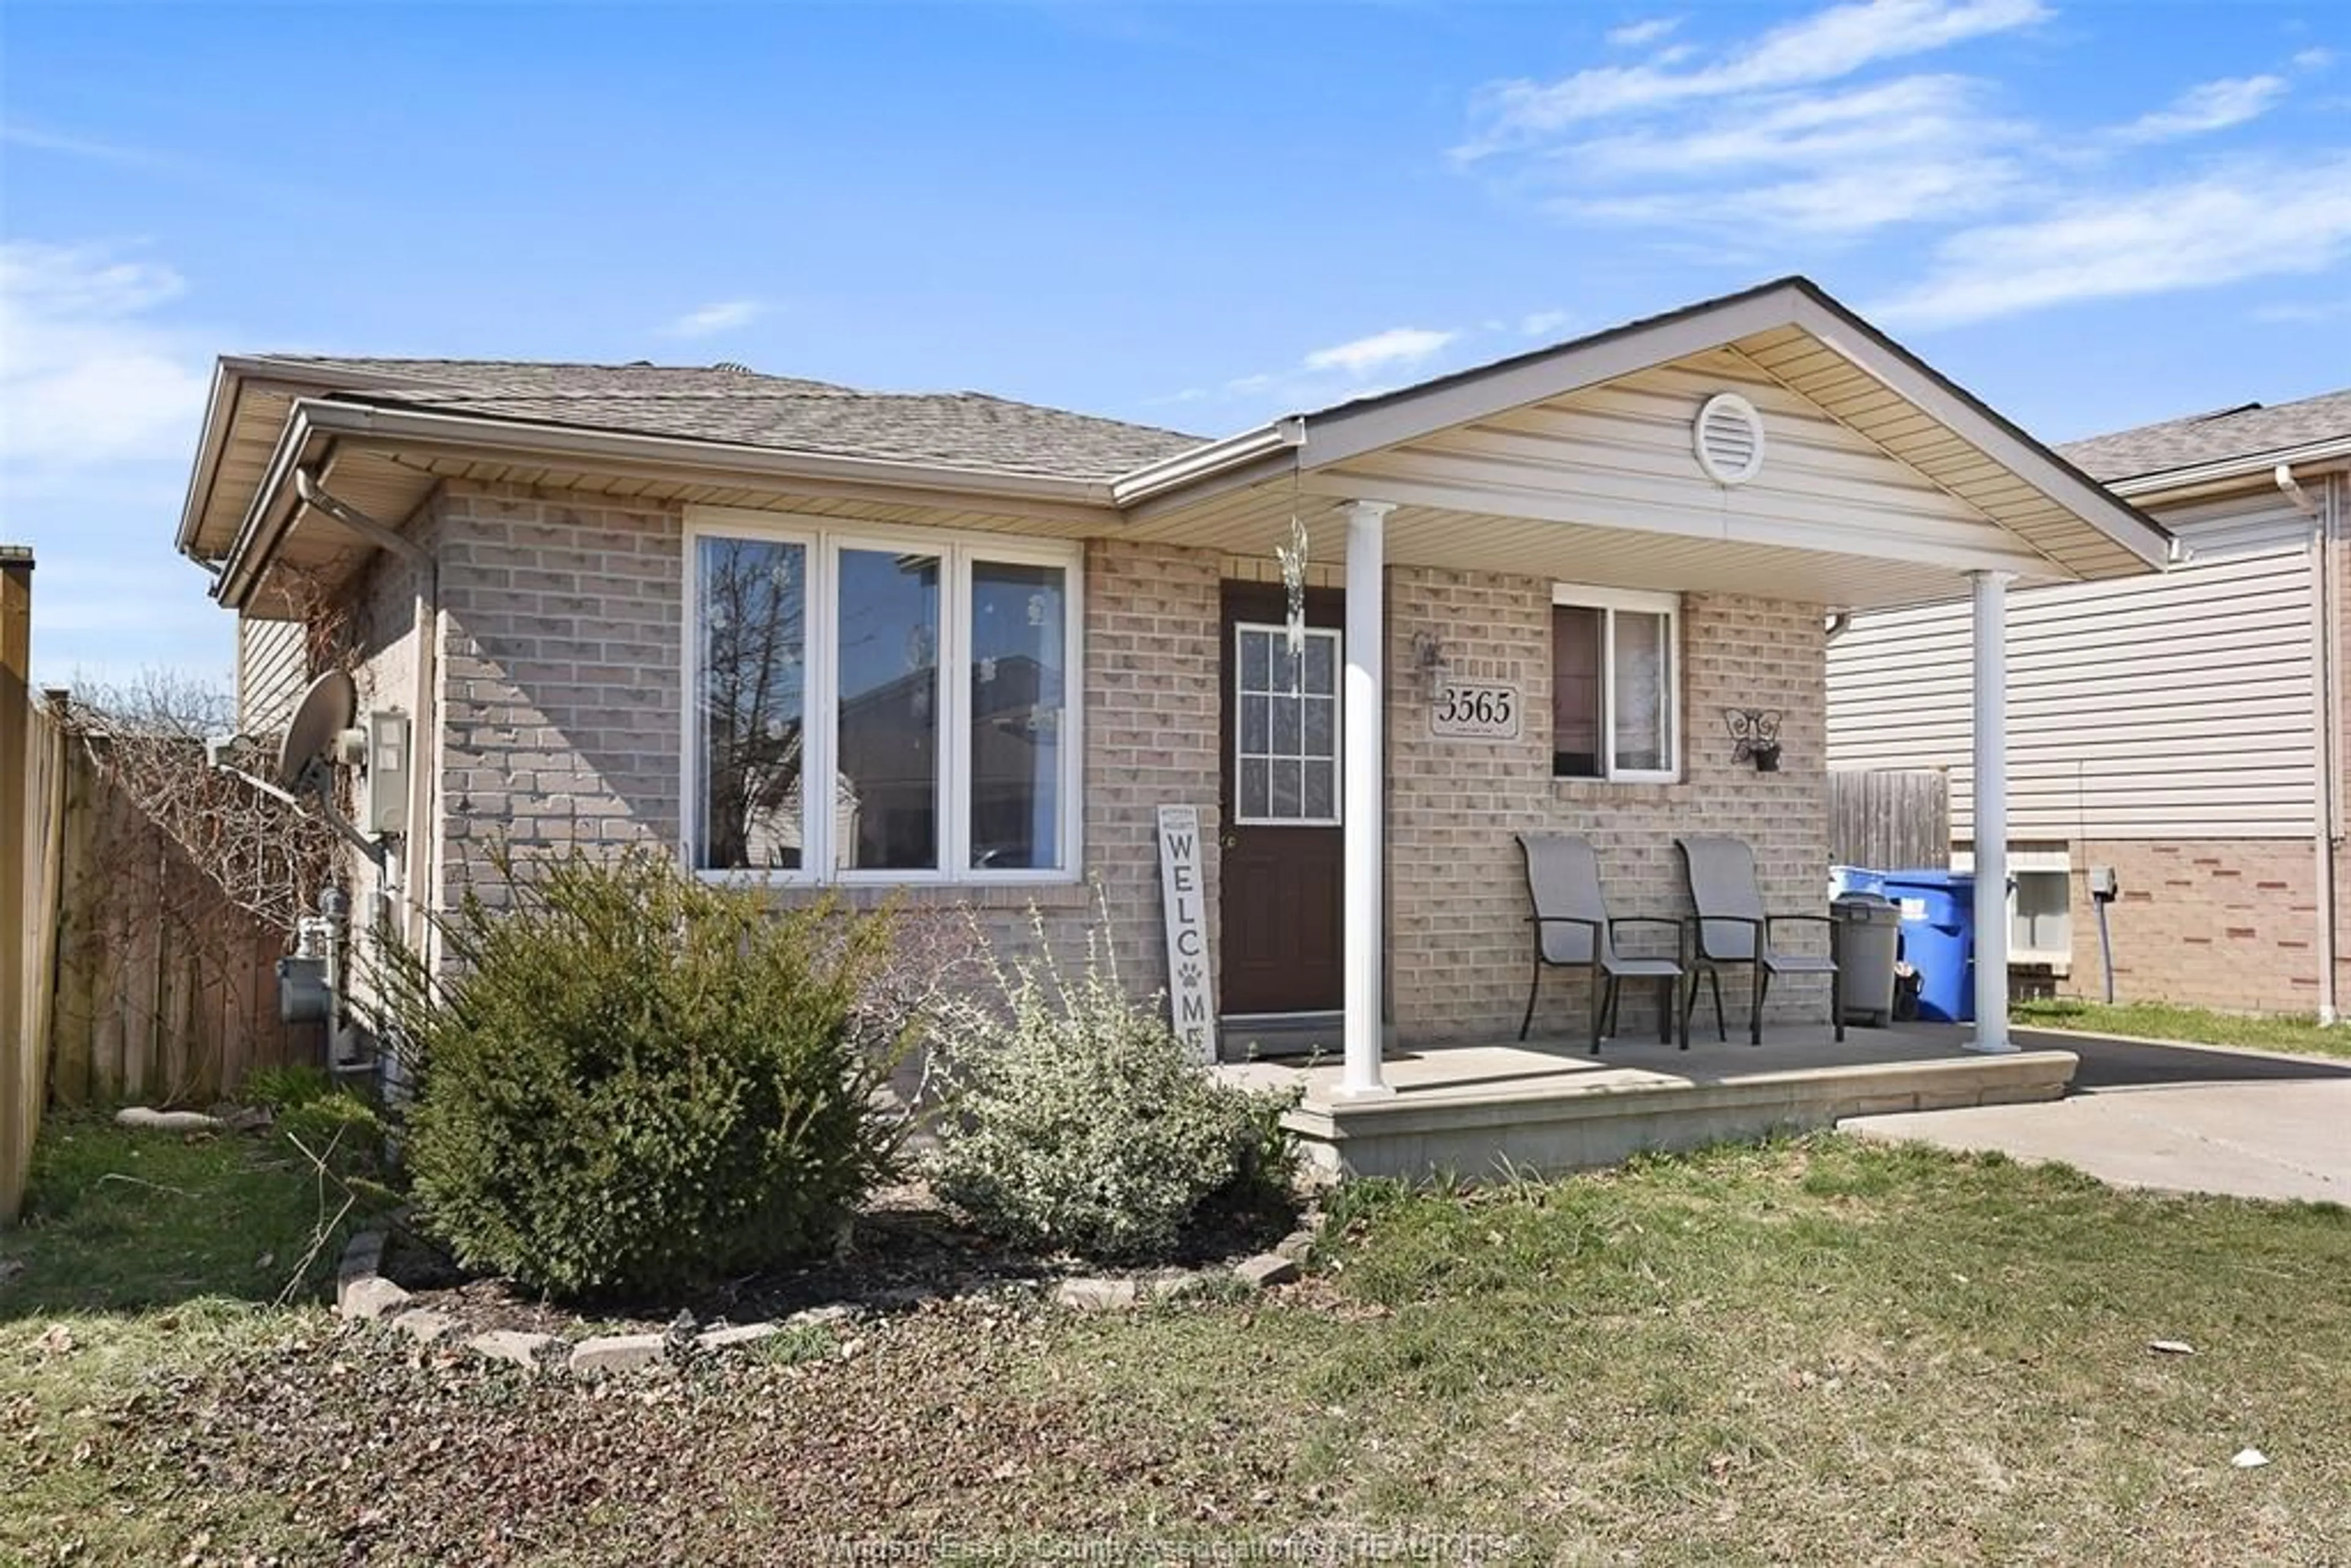 Home with brick exterior material for 3565 KLONDIKE, Windsor Ontario N8W 5T5